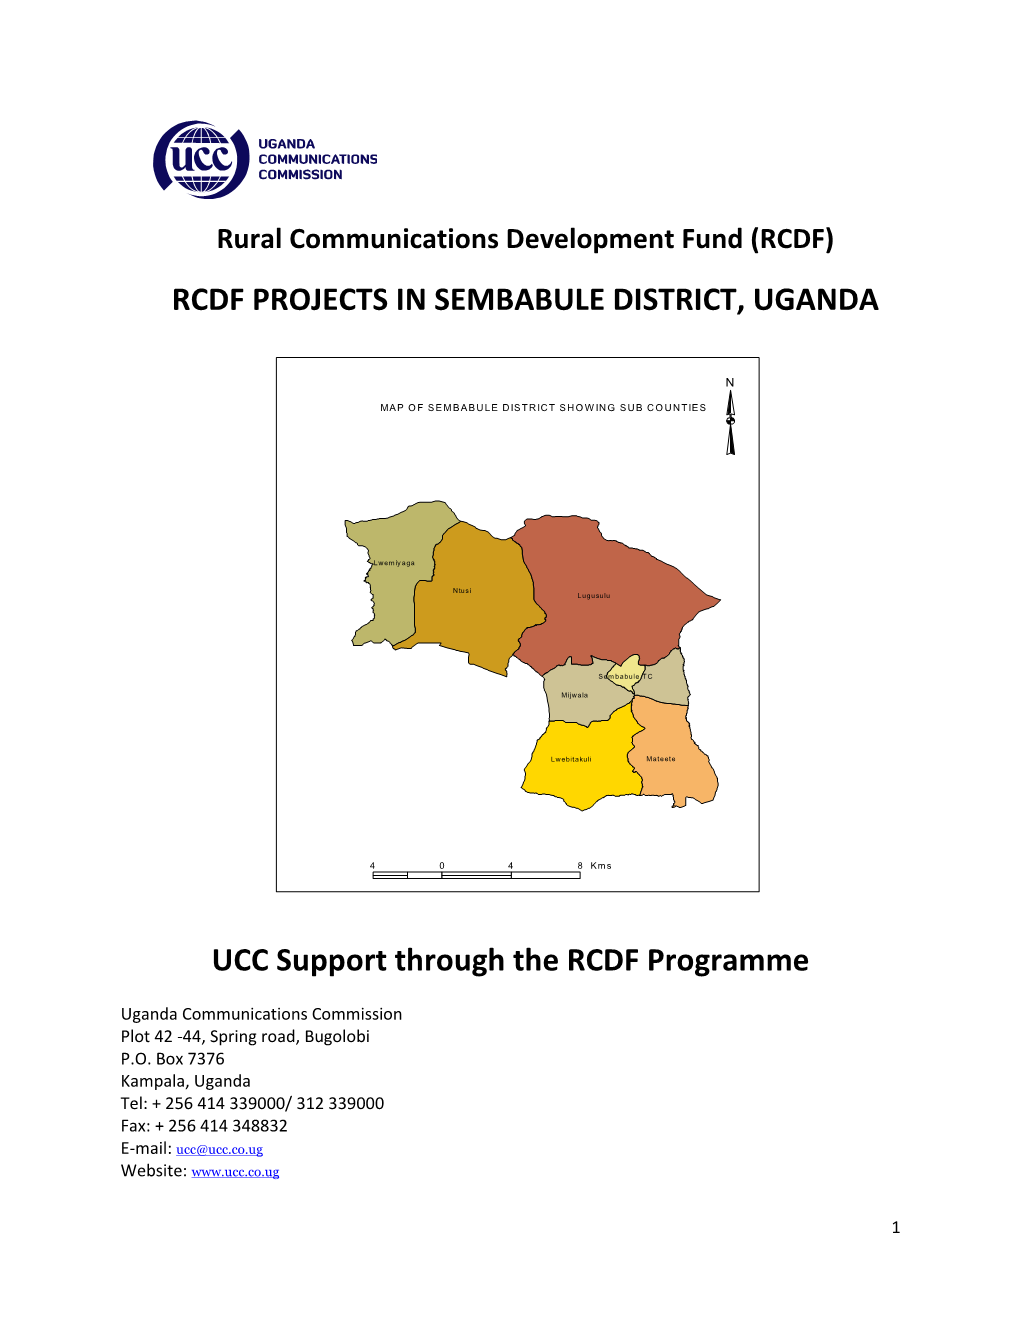 RCDF PROJECTS in SEMBABULE DISTRICT, UGANDA UCC Support